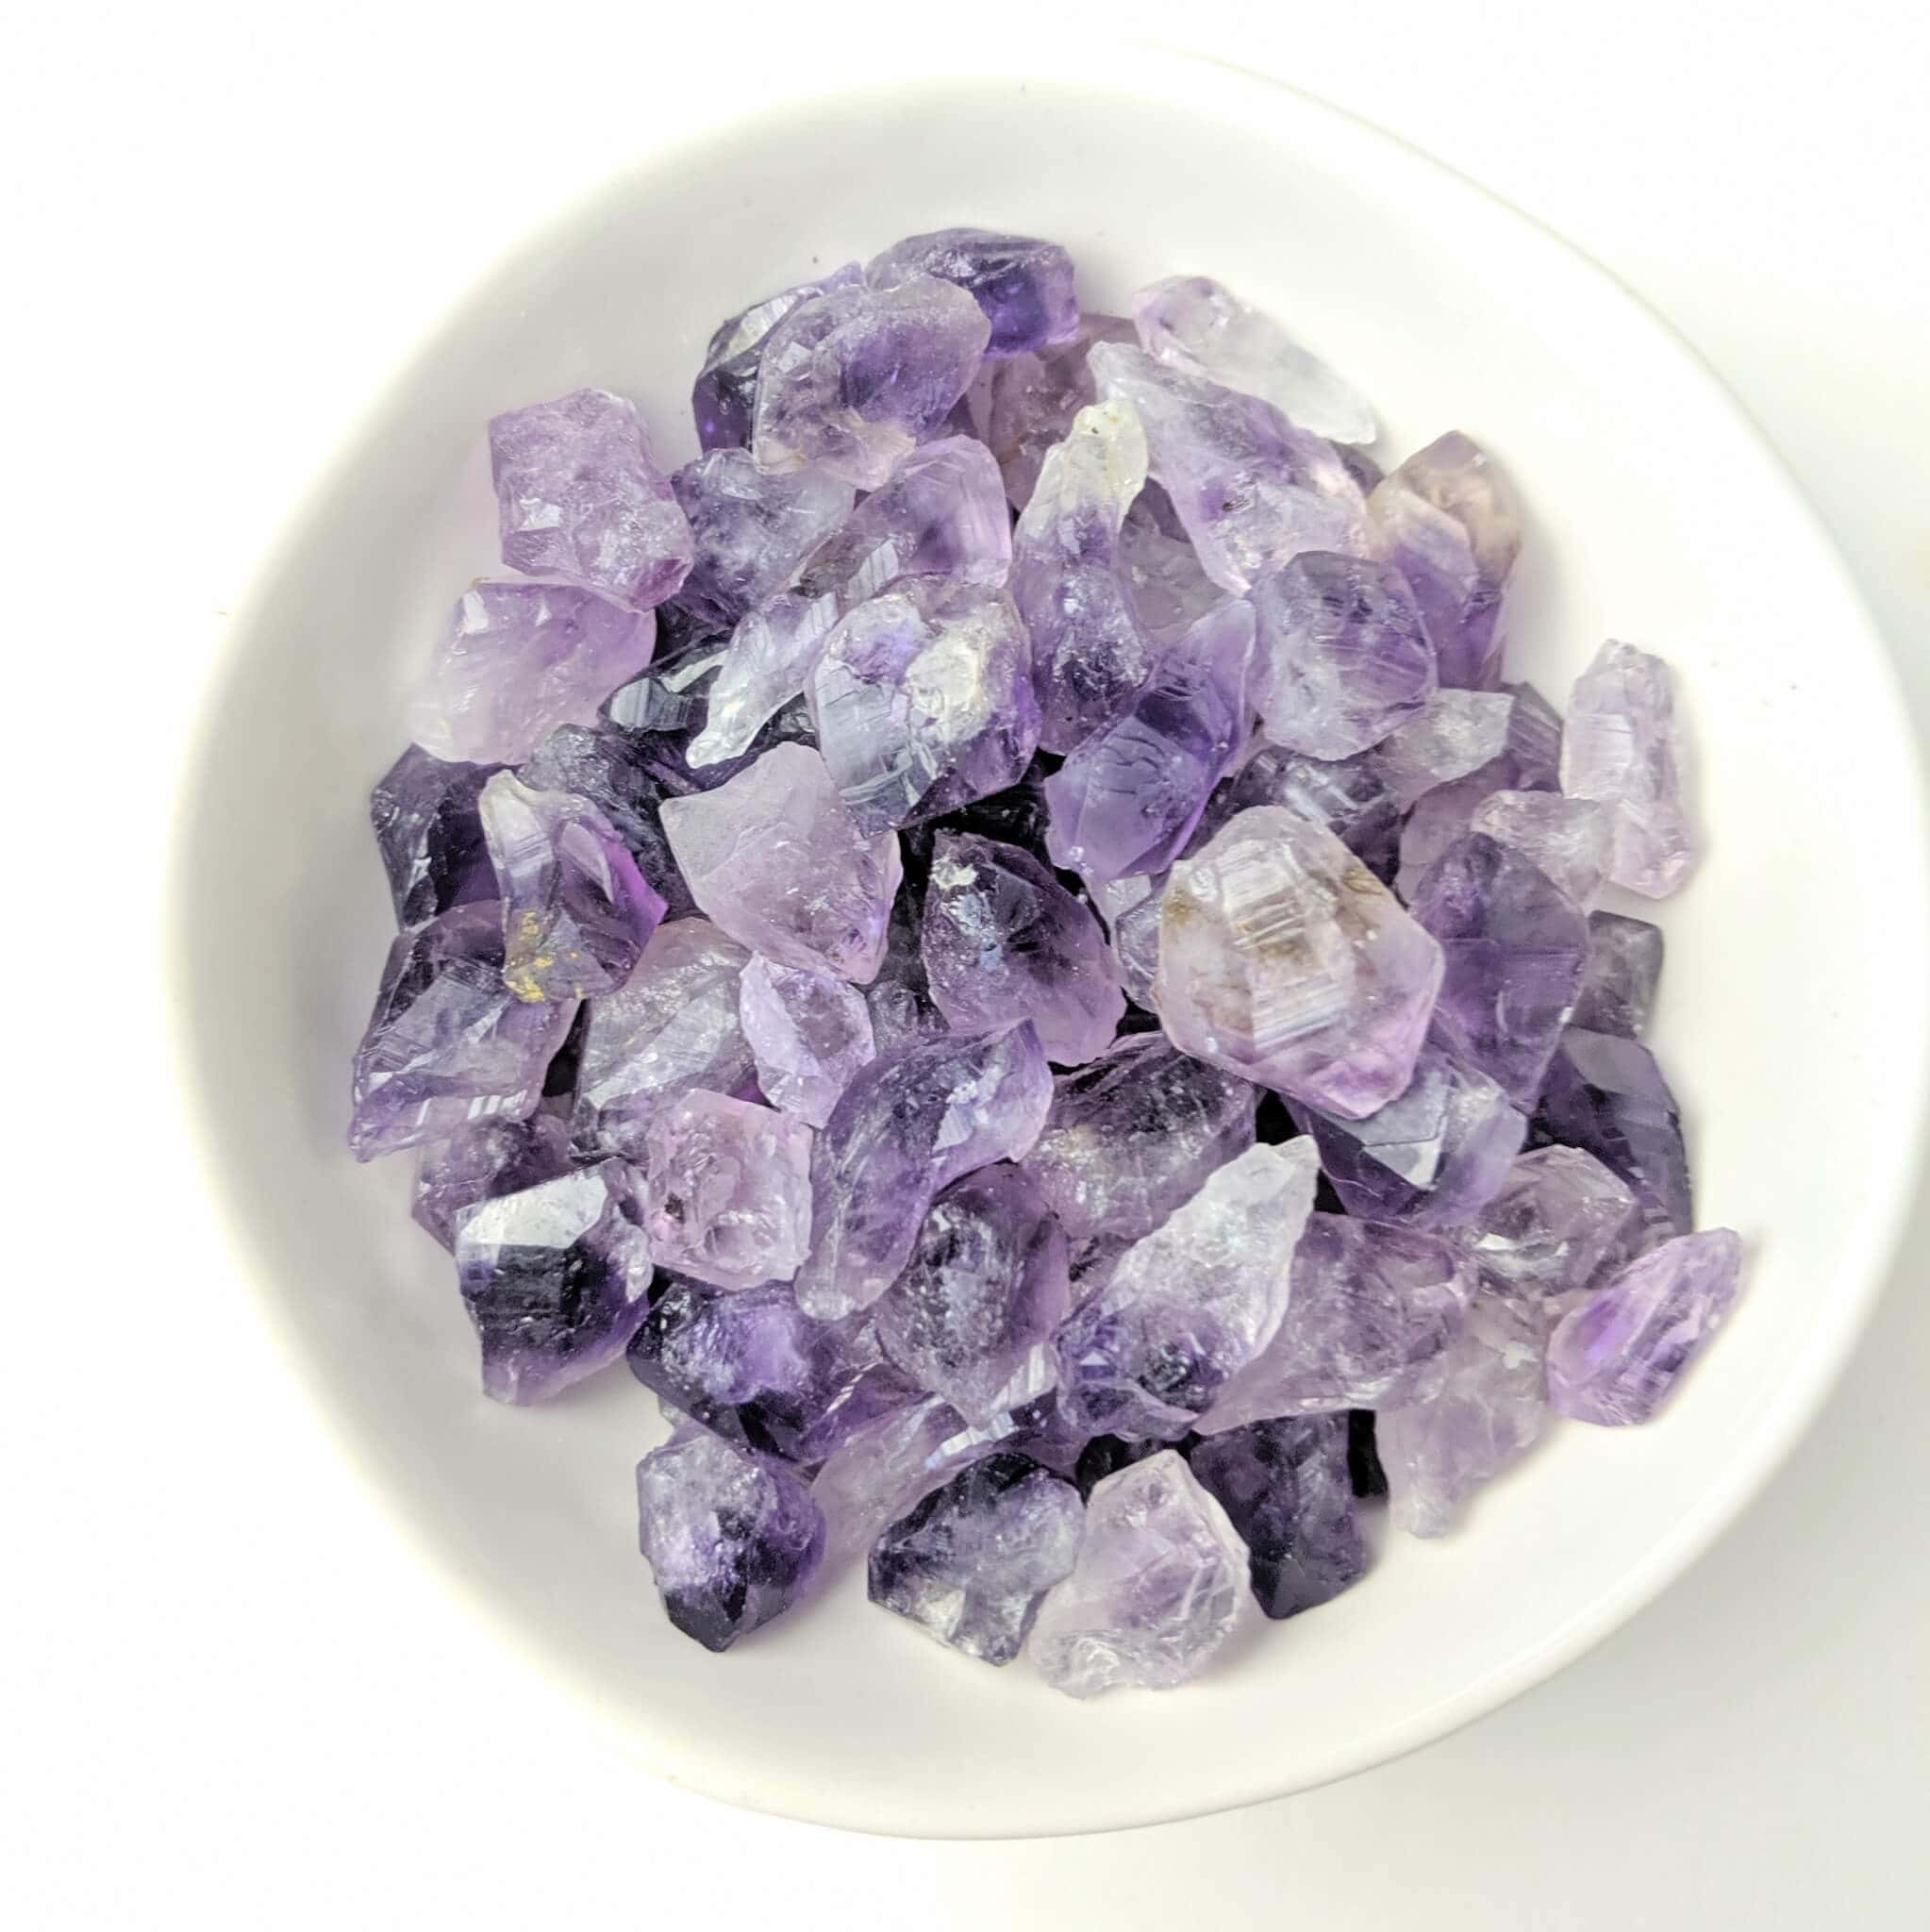 Amethyst Crystal Points in a White Bowl Top View